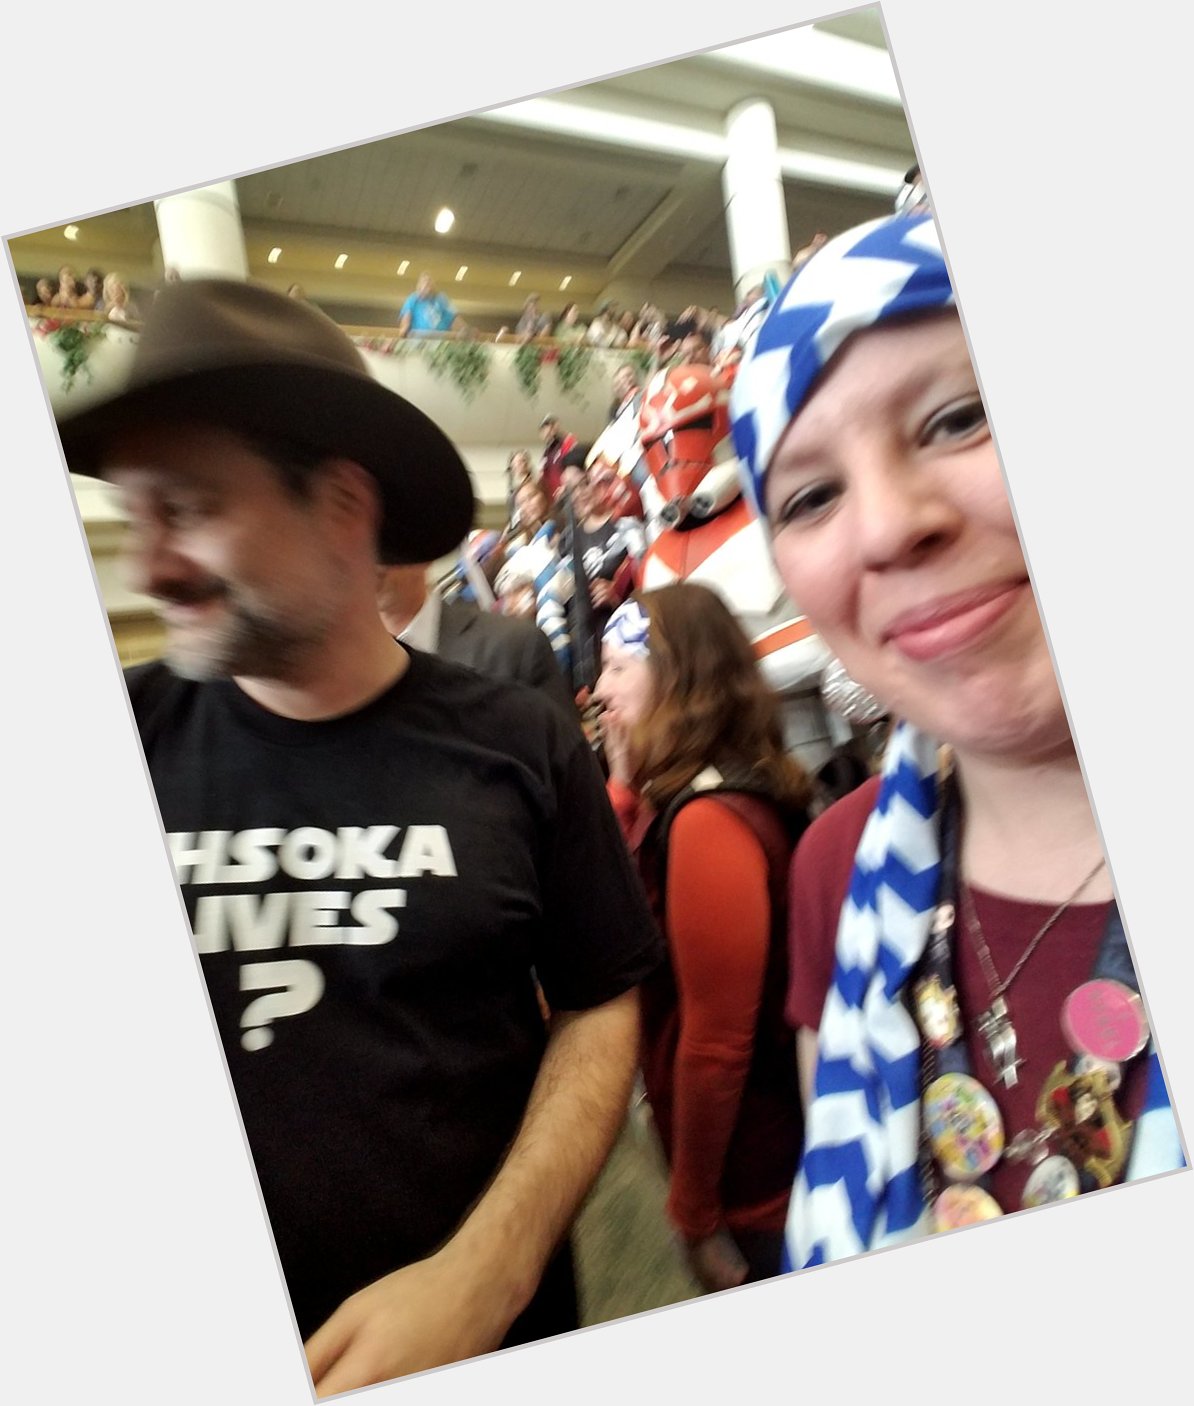 The time photo bombed my selfie at day at Happy birthday! (Again) 